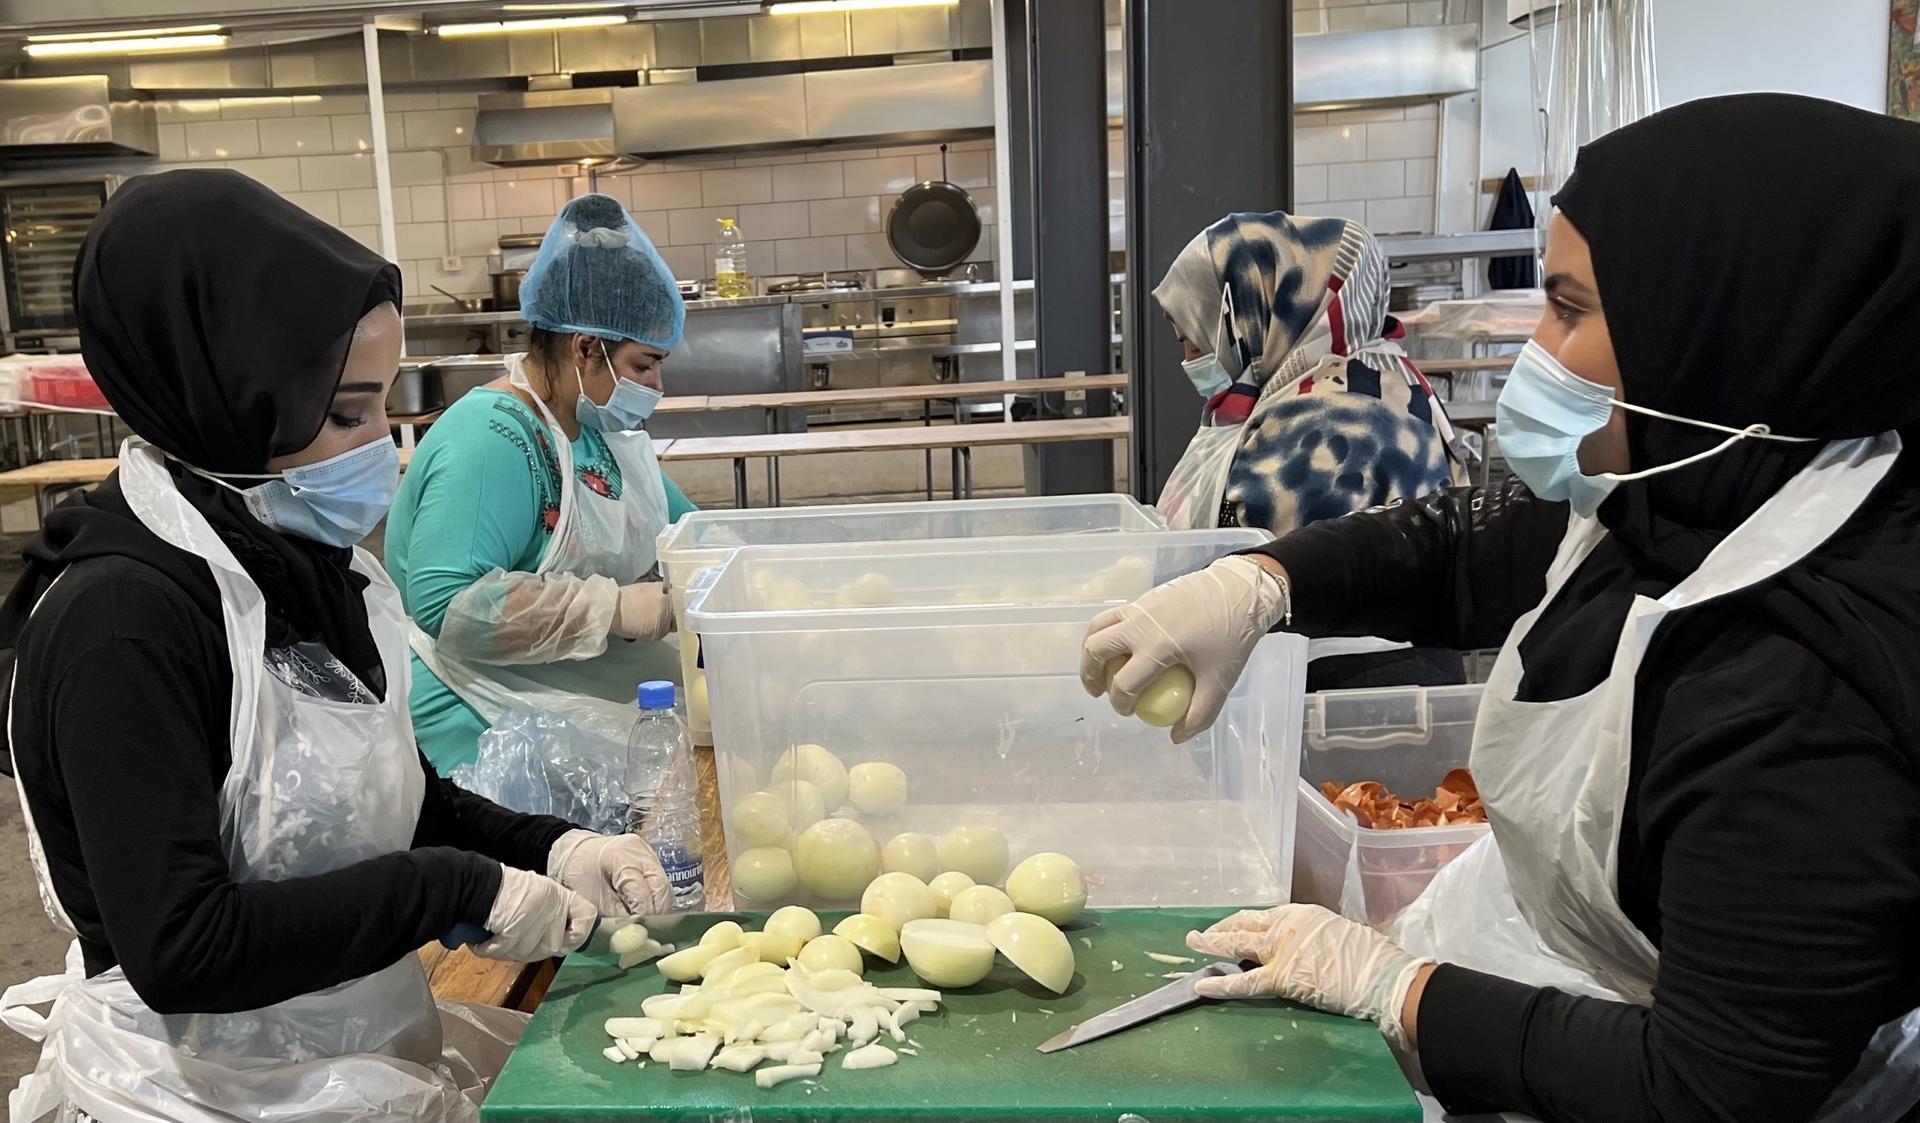 Workers prepare meals at the Matbakh El Kell Community Kitchen in Beirut.